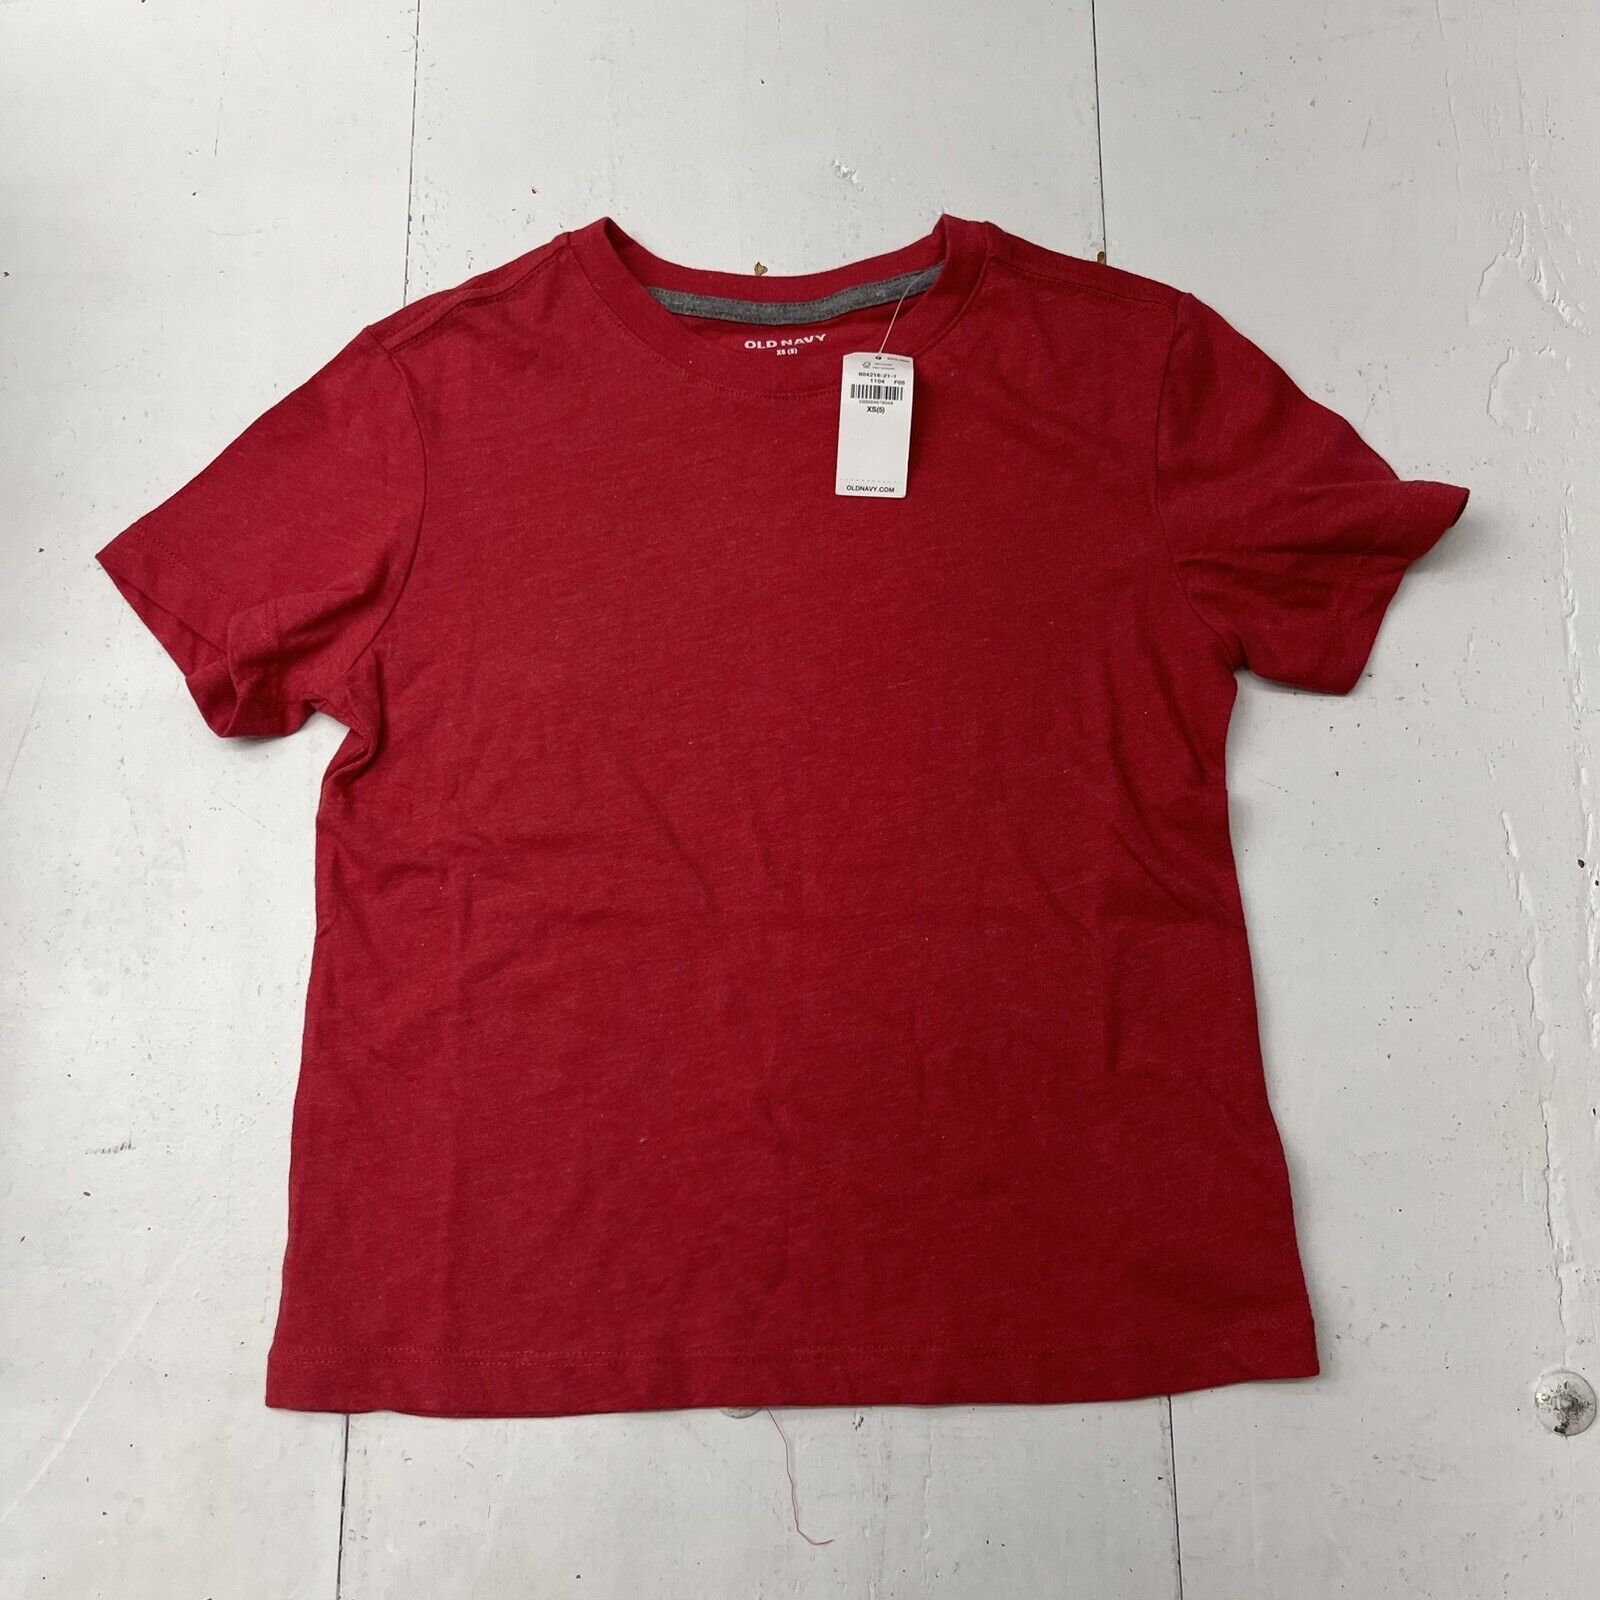 Old Navy Red Softest Short Sleeve Solid T-Shirt Boys Size XS (5) NEW